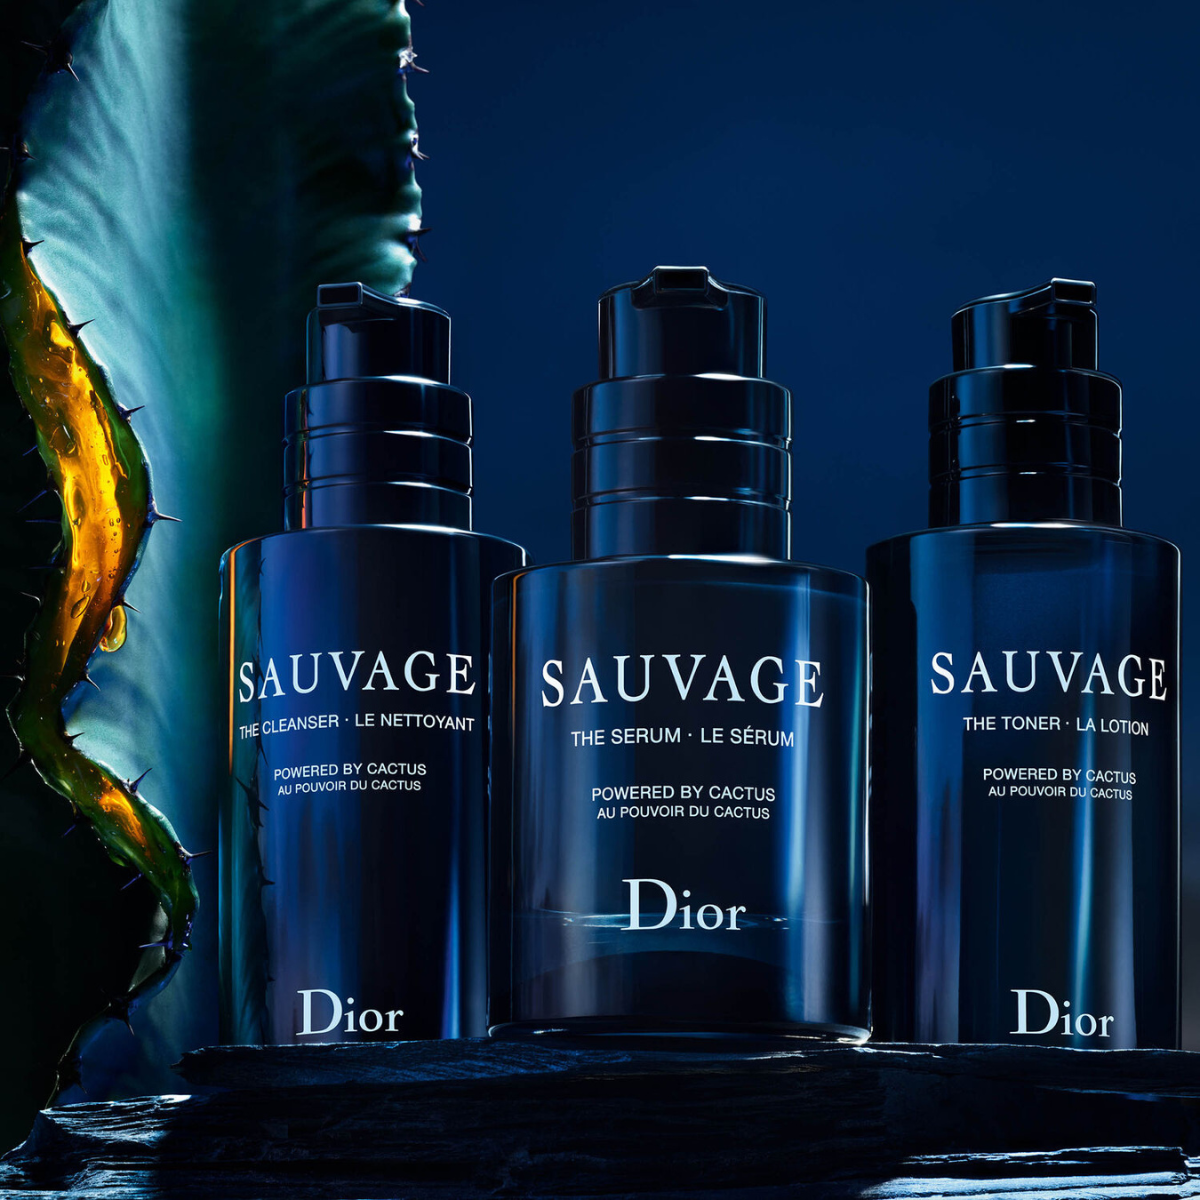 Dior Sauvage The Cleanser